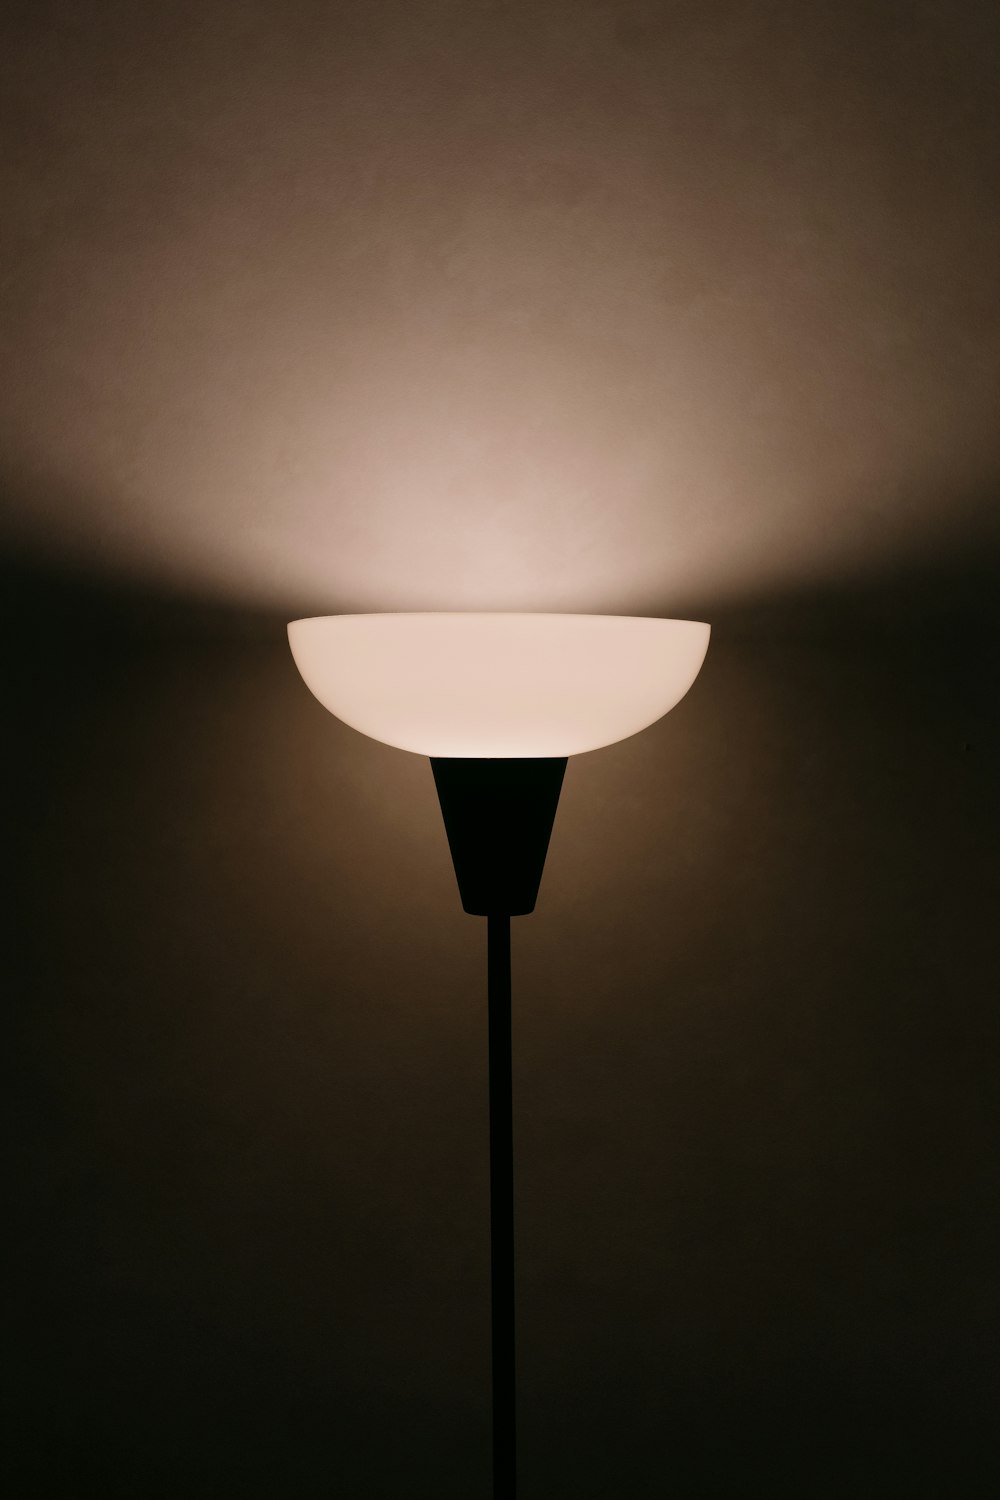 a lamp that is lit up in the dark